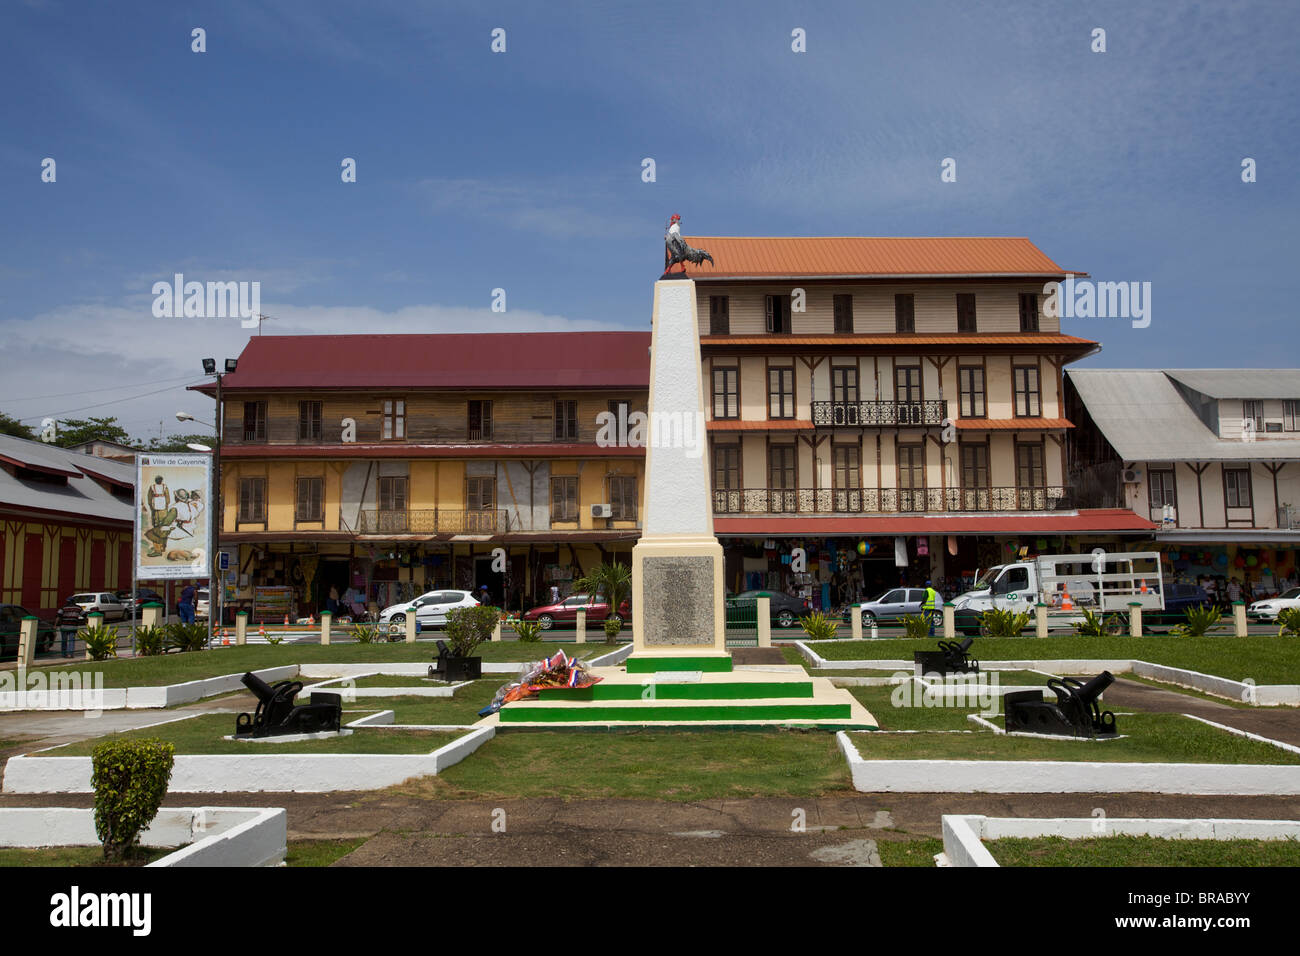 The city center of Cayenne, French Guiana, South America Stock Photo